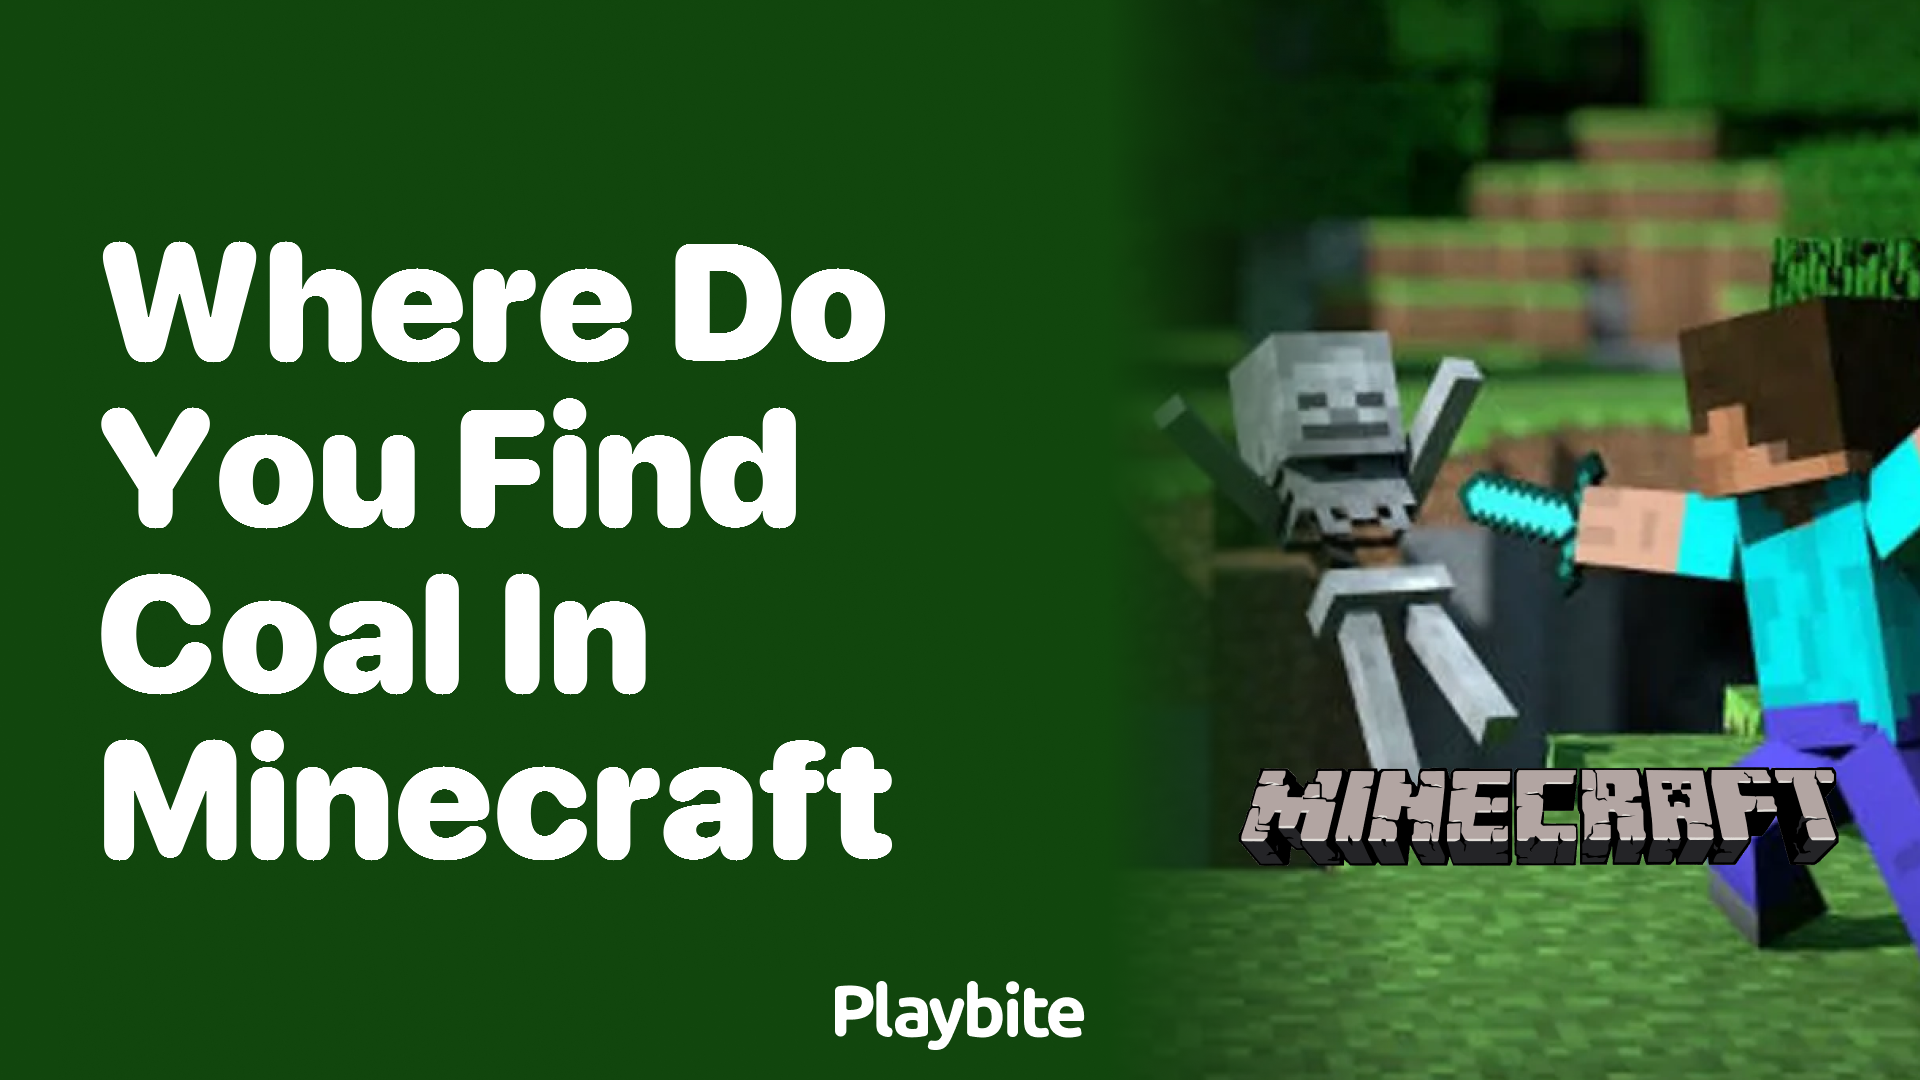 Where Do You Find Coal in Minecraft?